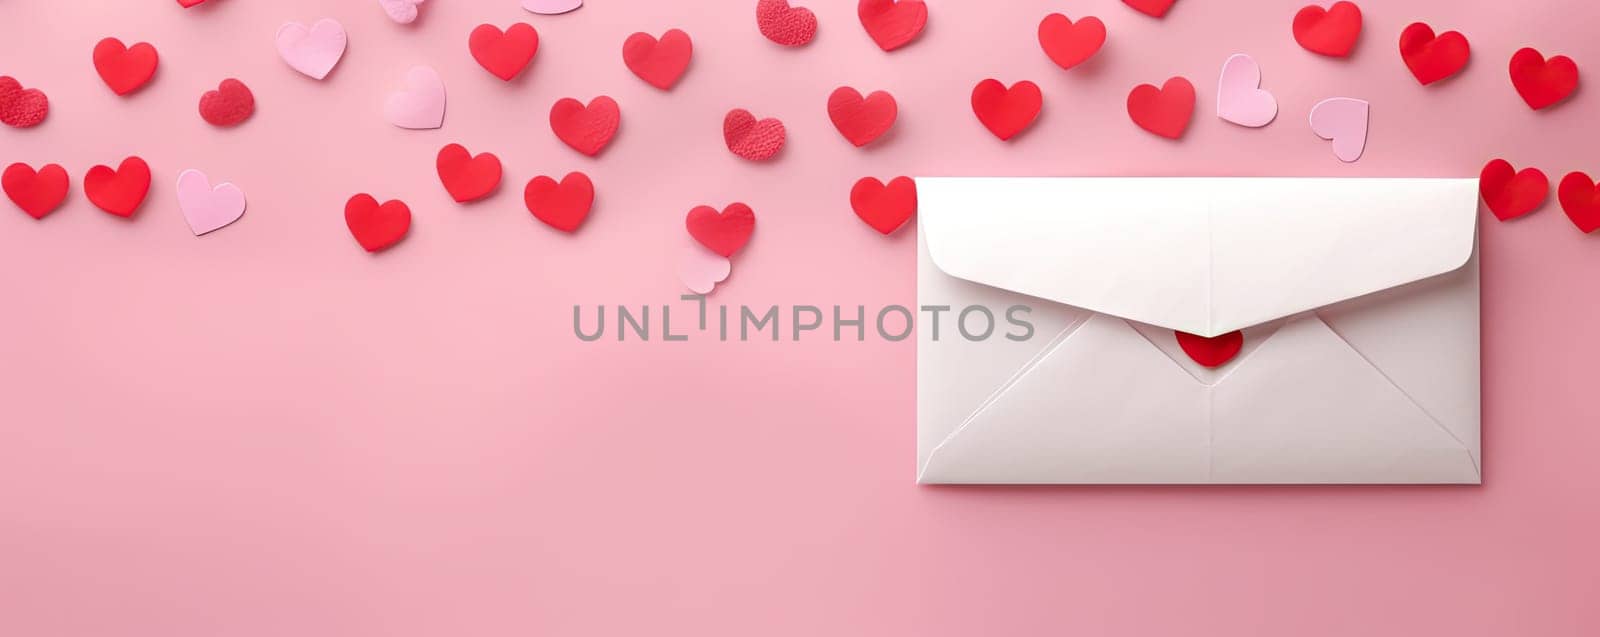 Envelope with hearts on pink background by Yurich32